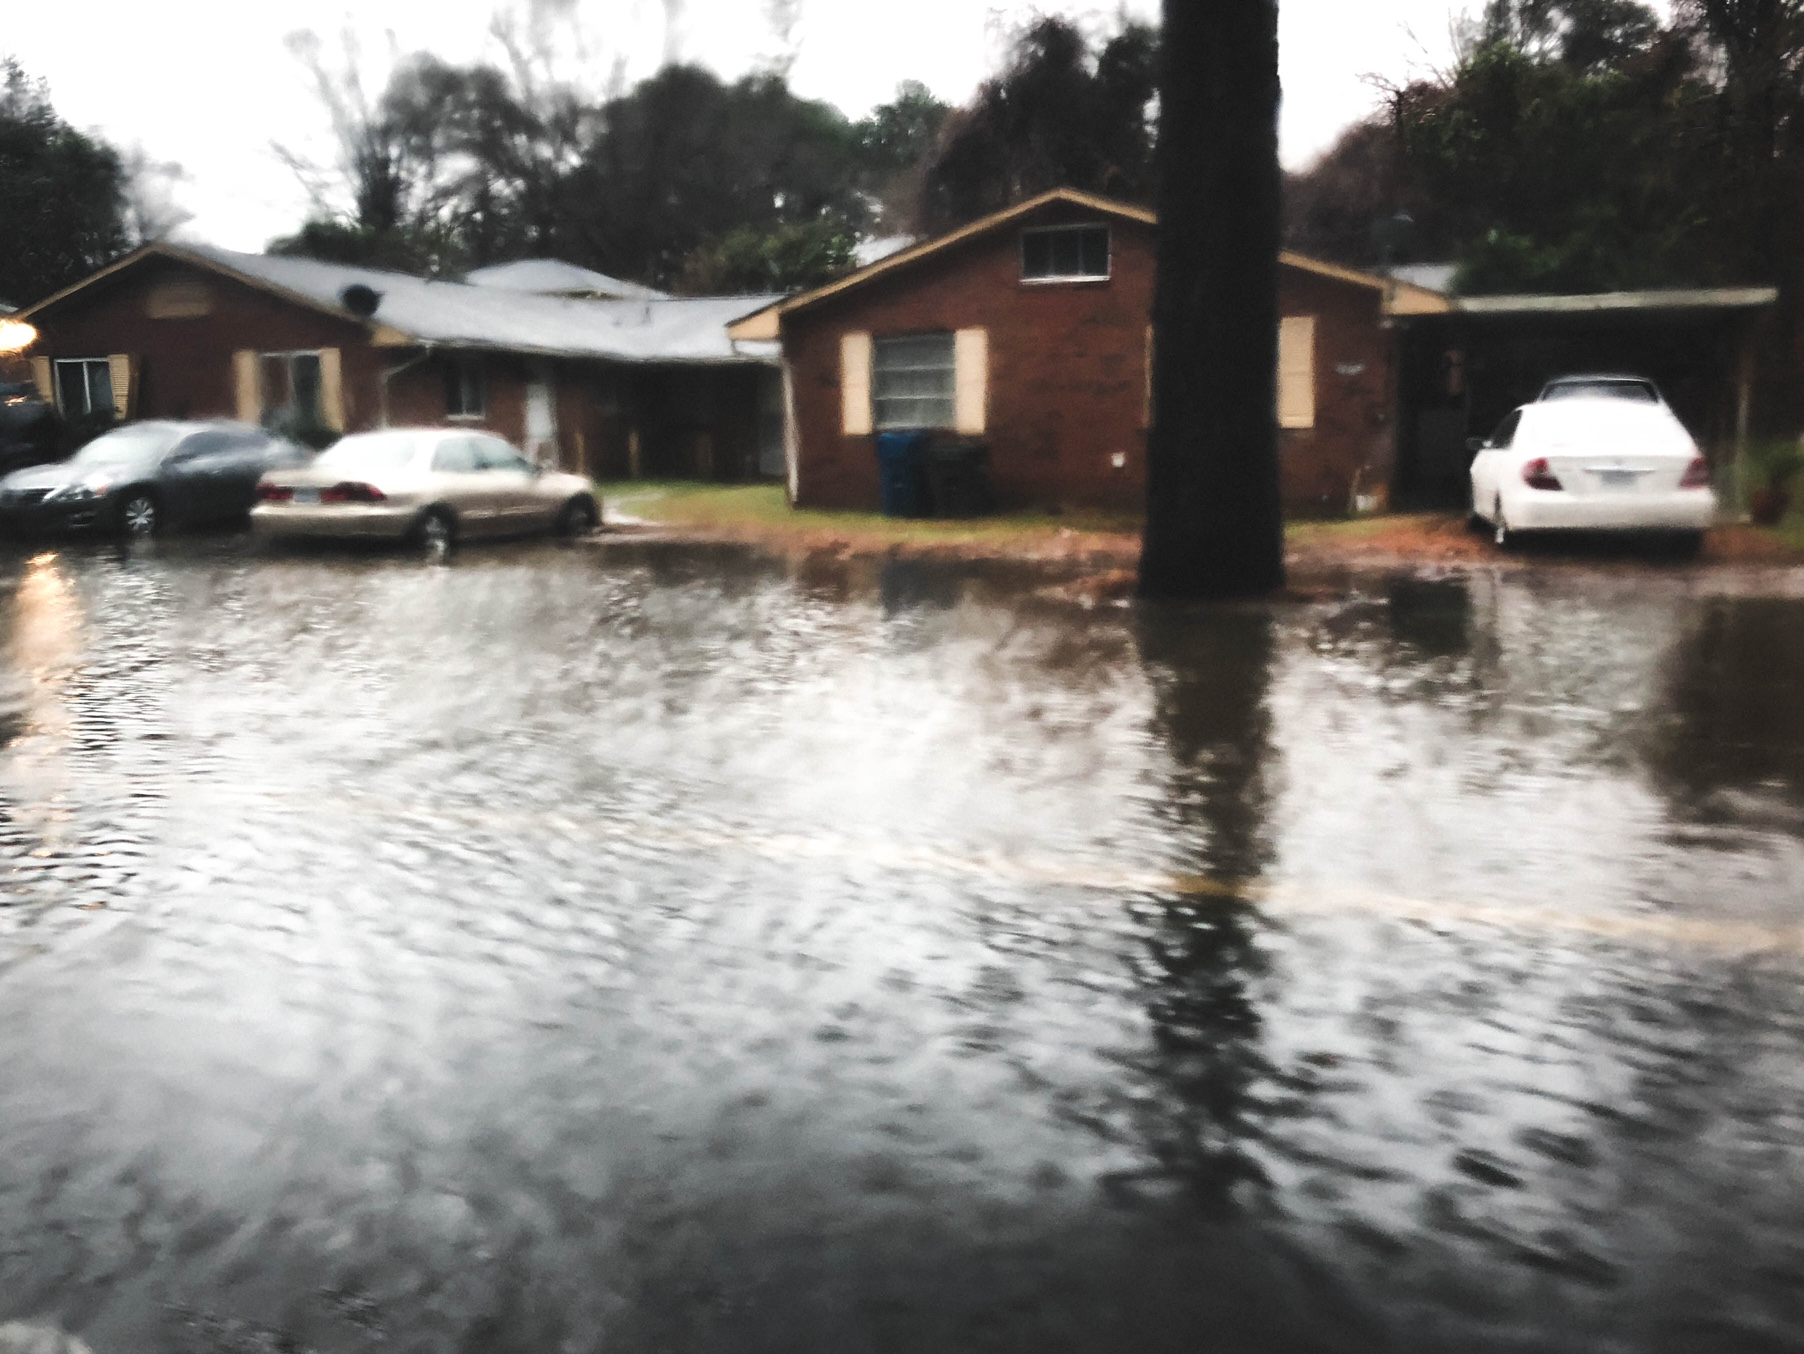 Featured image for the Identifying Gaps in Urban Flooding Reporting in Durham project.